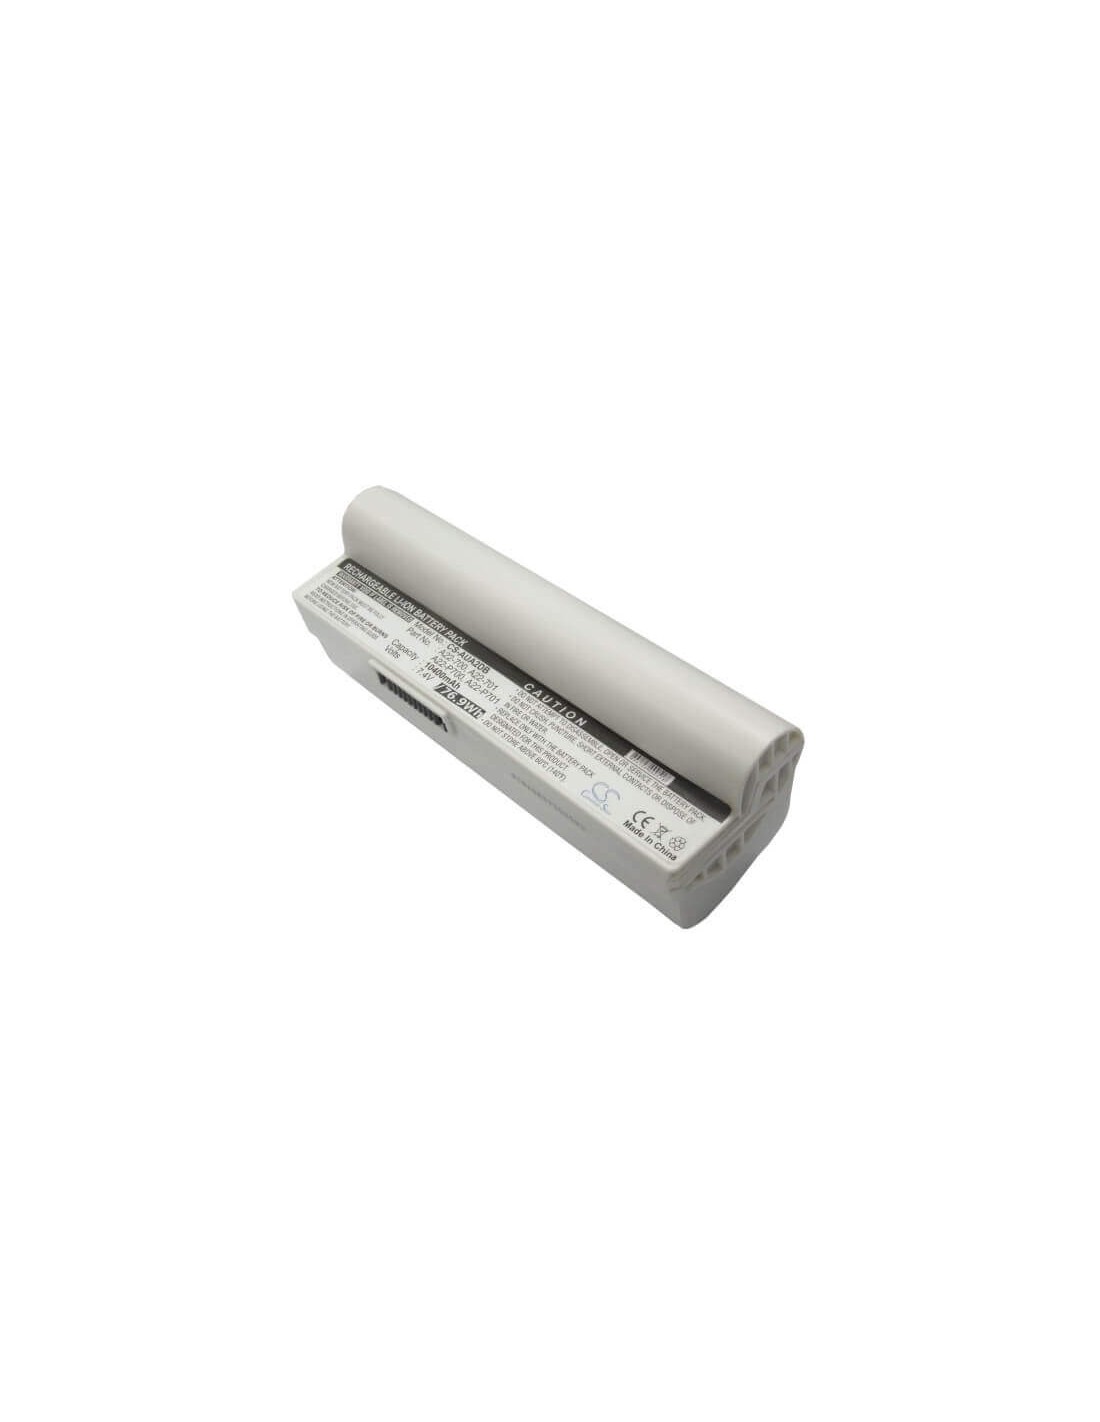 White Battery for Asus Eee Pc 701, Eee Pc 701c, Eee Pc 800 7.4V, 10400mAh - 76.96Wh